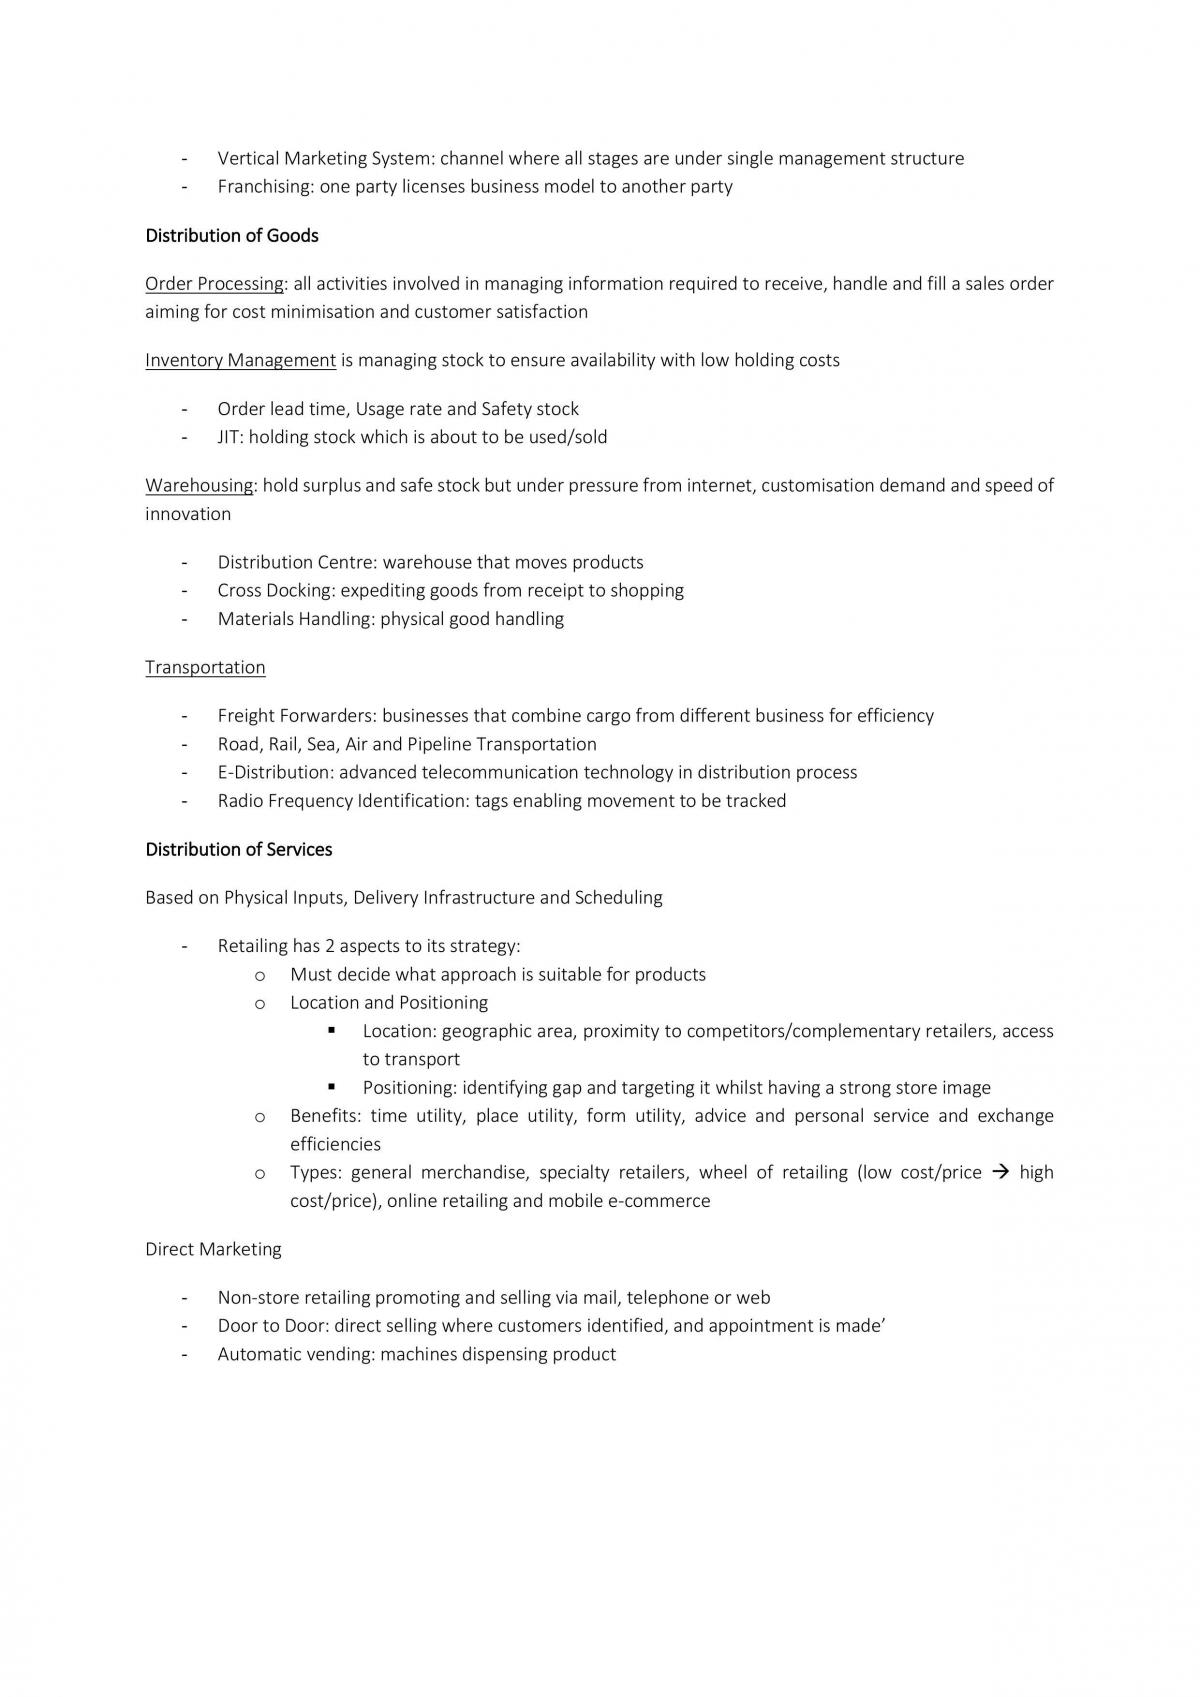 Complete Marketing Study Notes  - Page 22